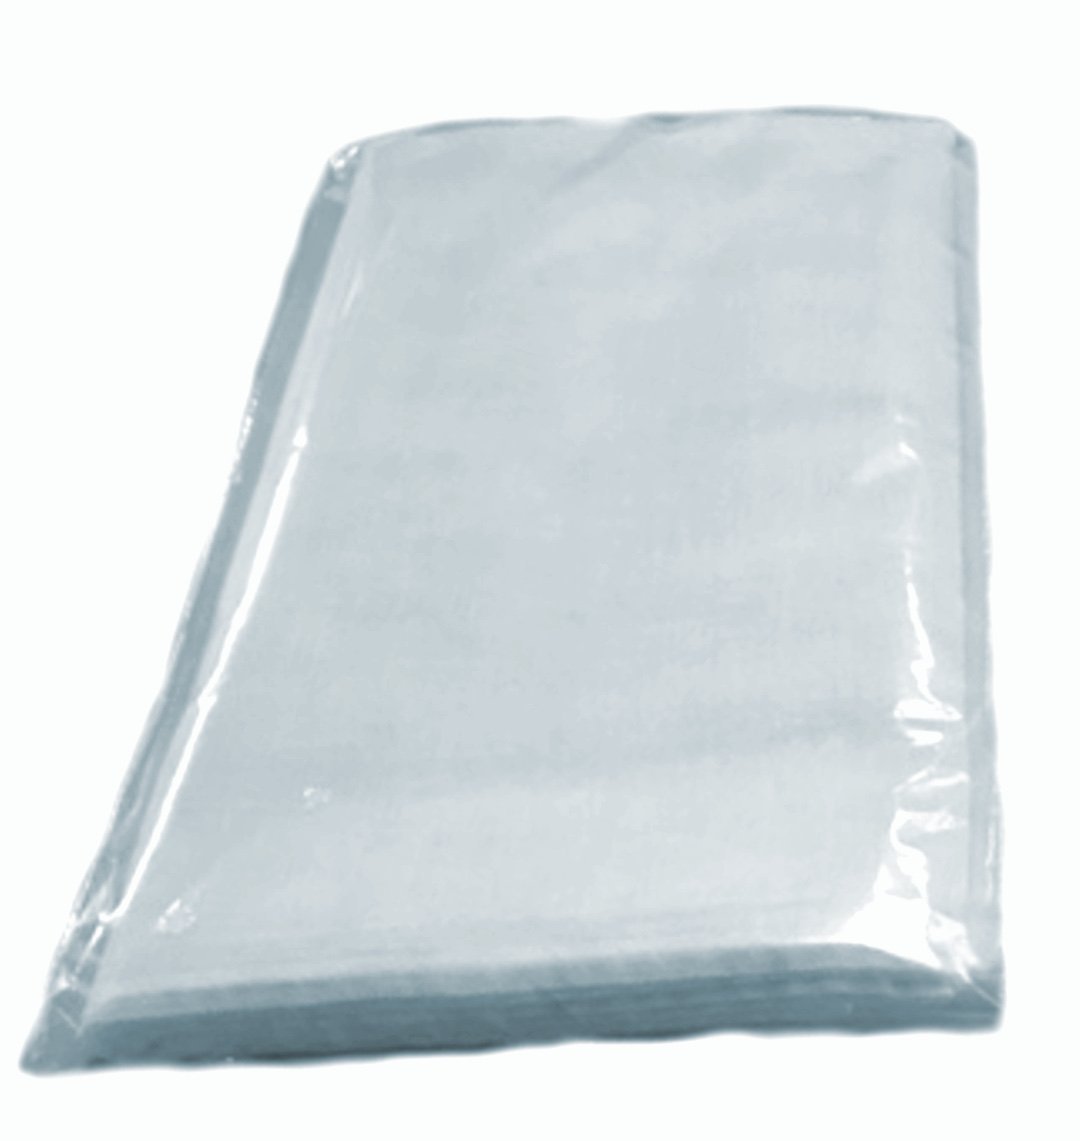 Grade 90 White Cheesecloth 9 Square Ft Individually Bagged